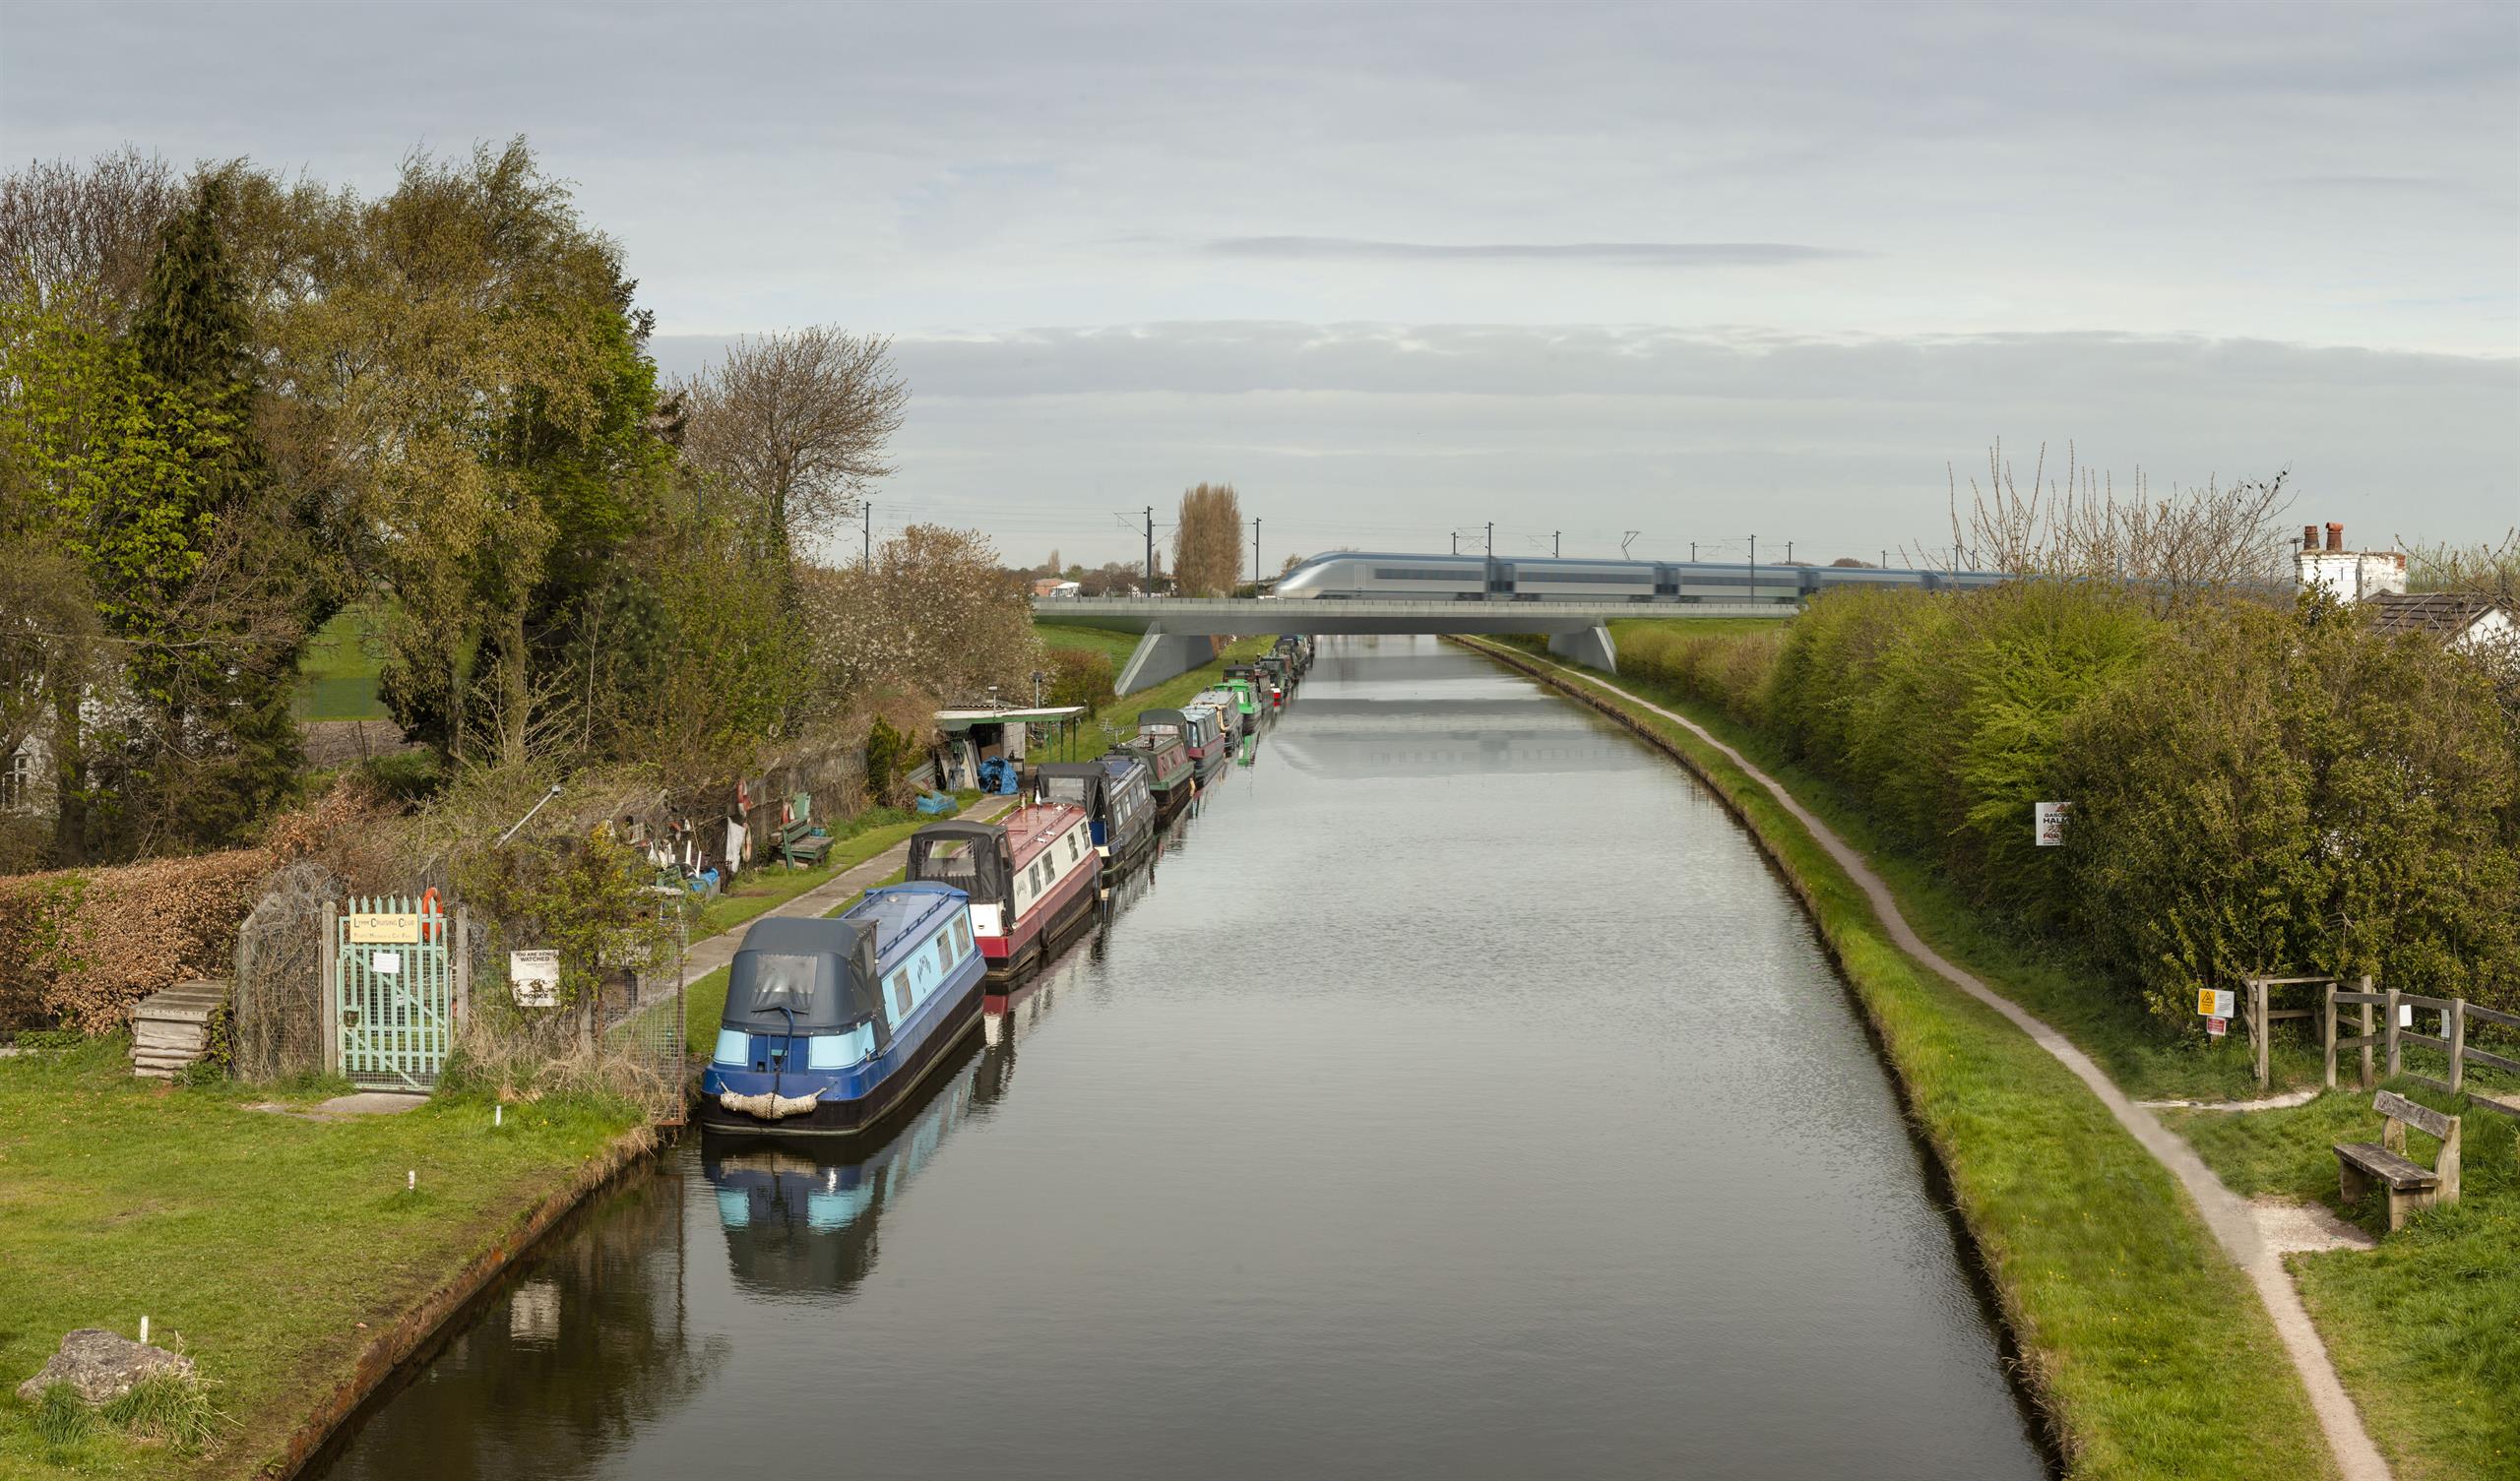 artist's impression of HS2 crossing a canal